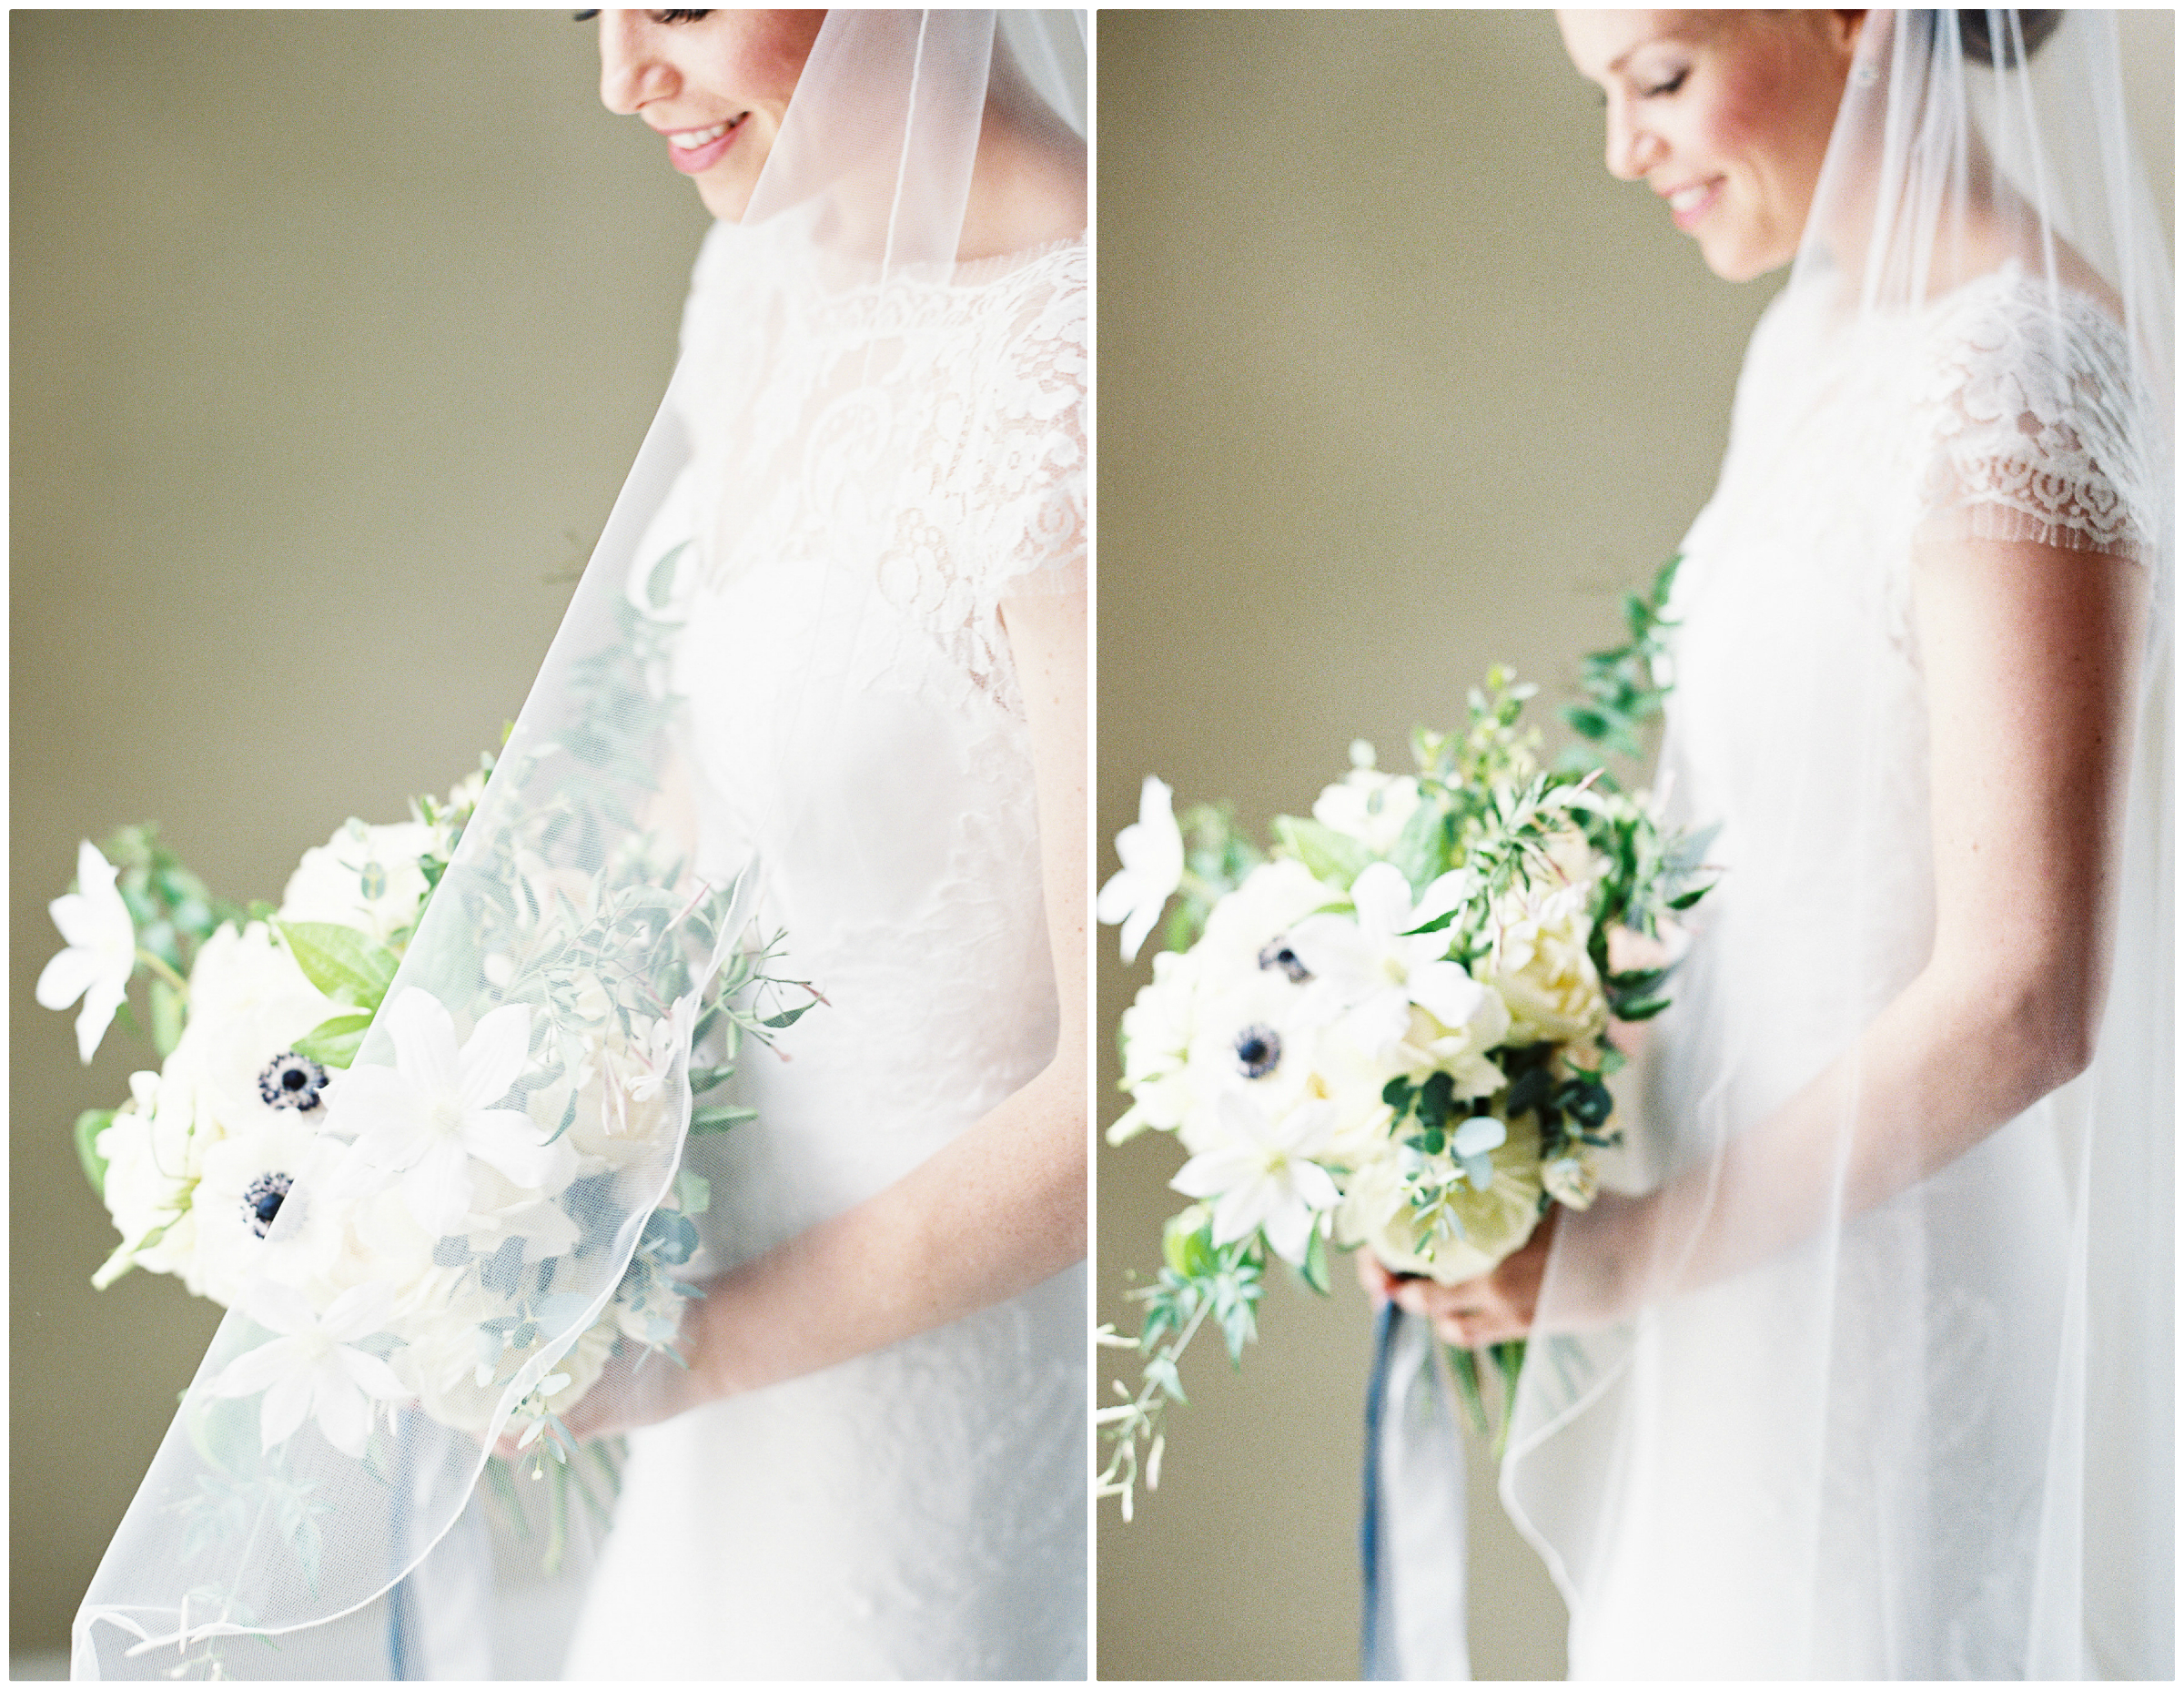 Nautical White Bridal Bouquet | The Day's Design | Clary Pfieffer Photography